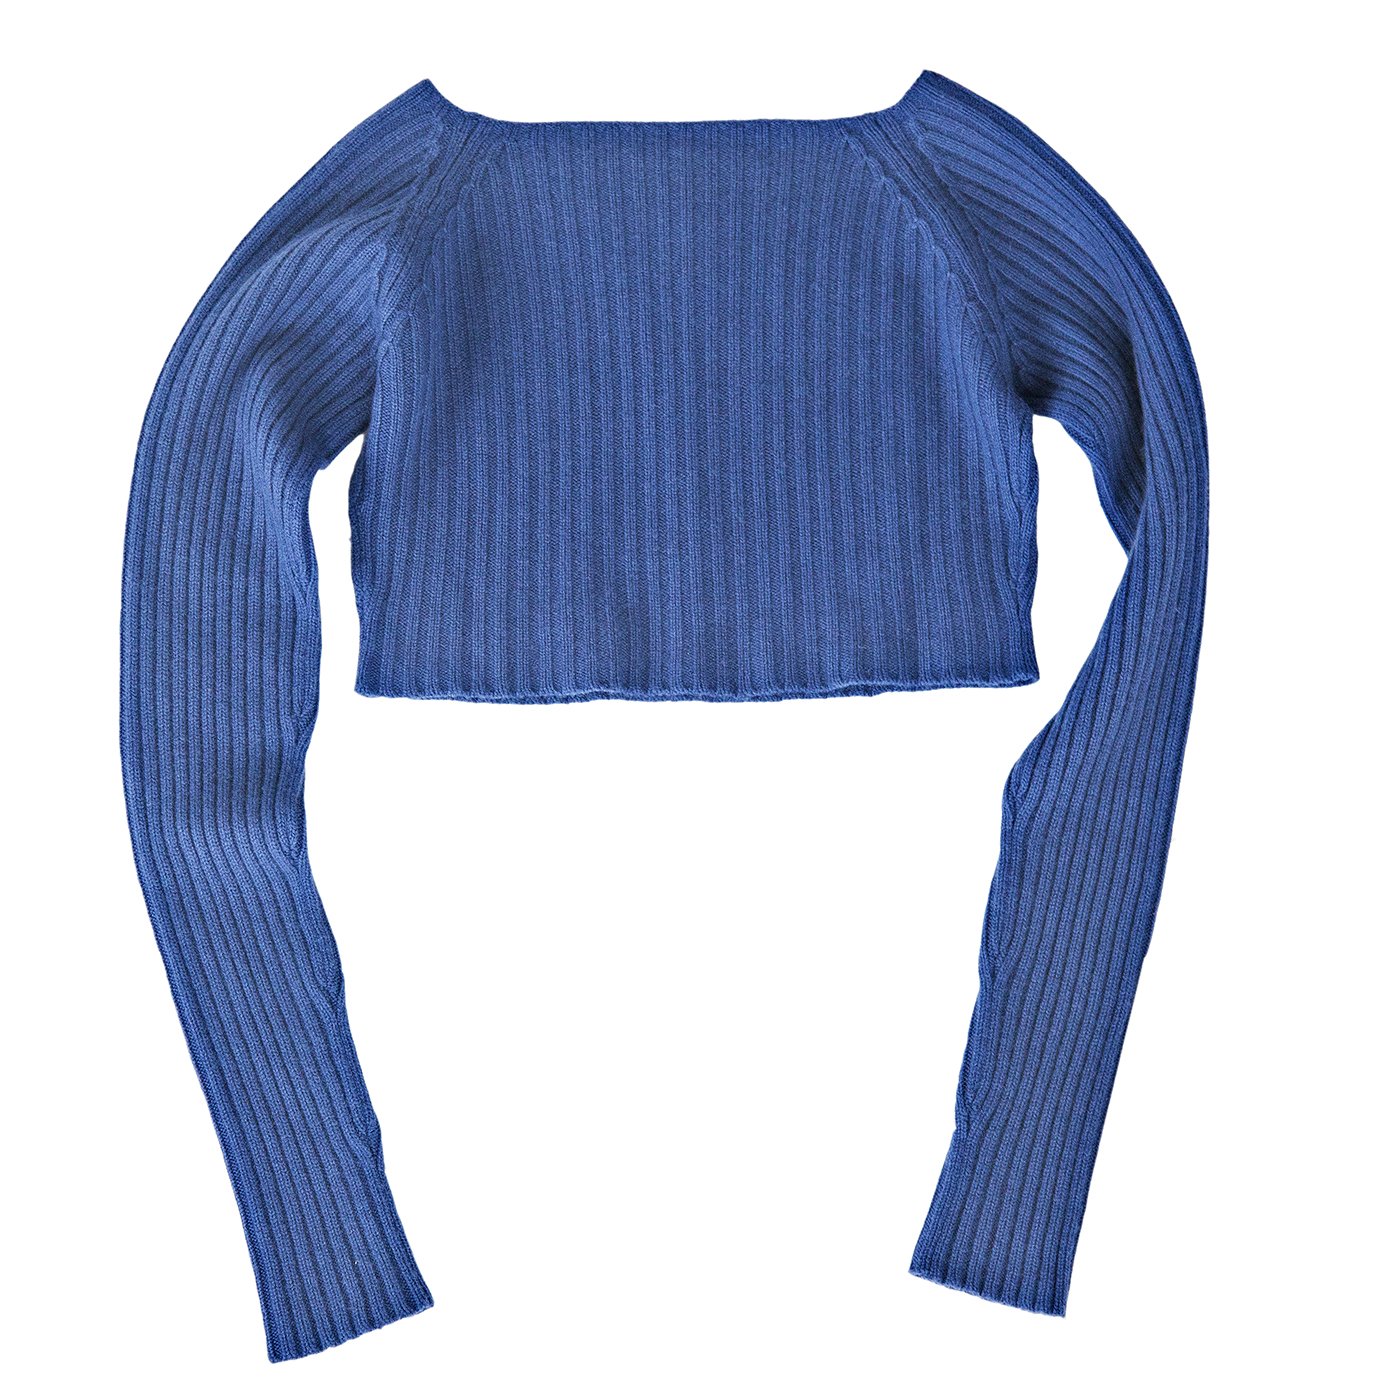 Kat Cashmere, Blue Cropped Sweater.jpg